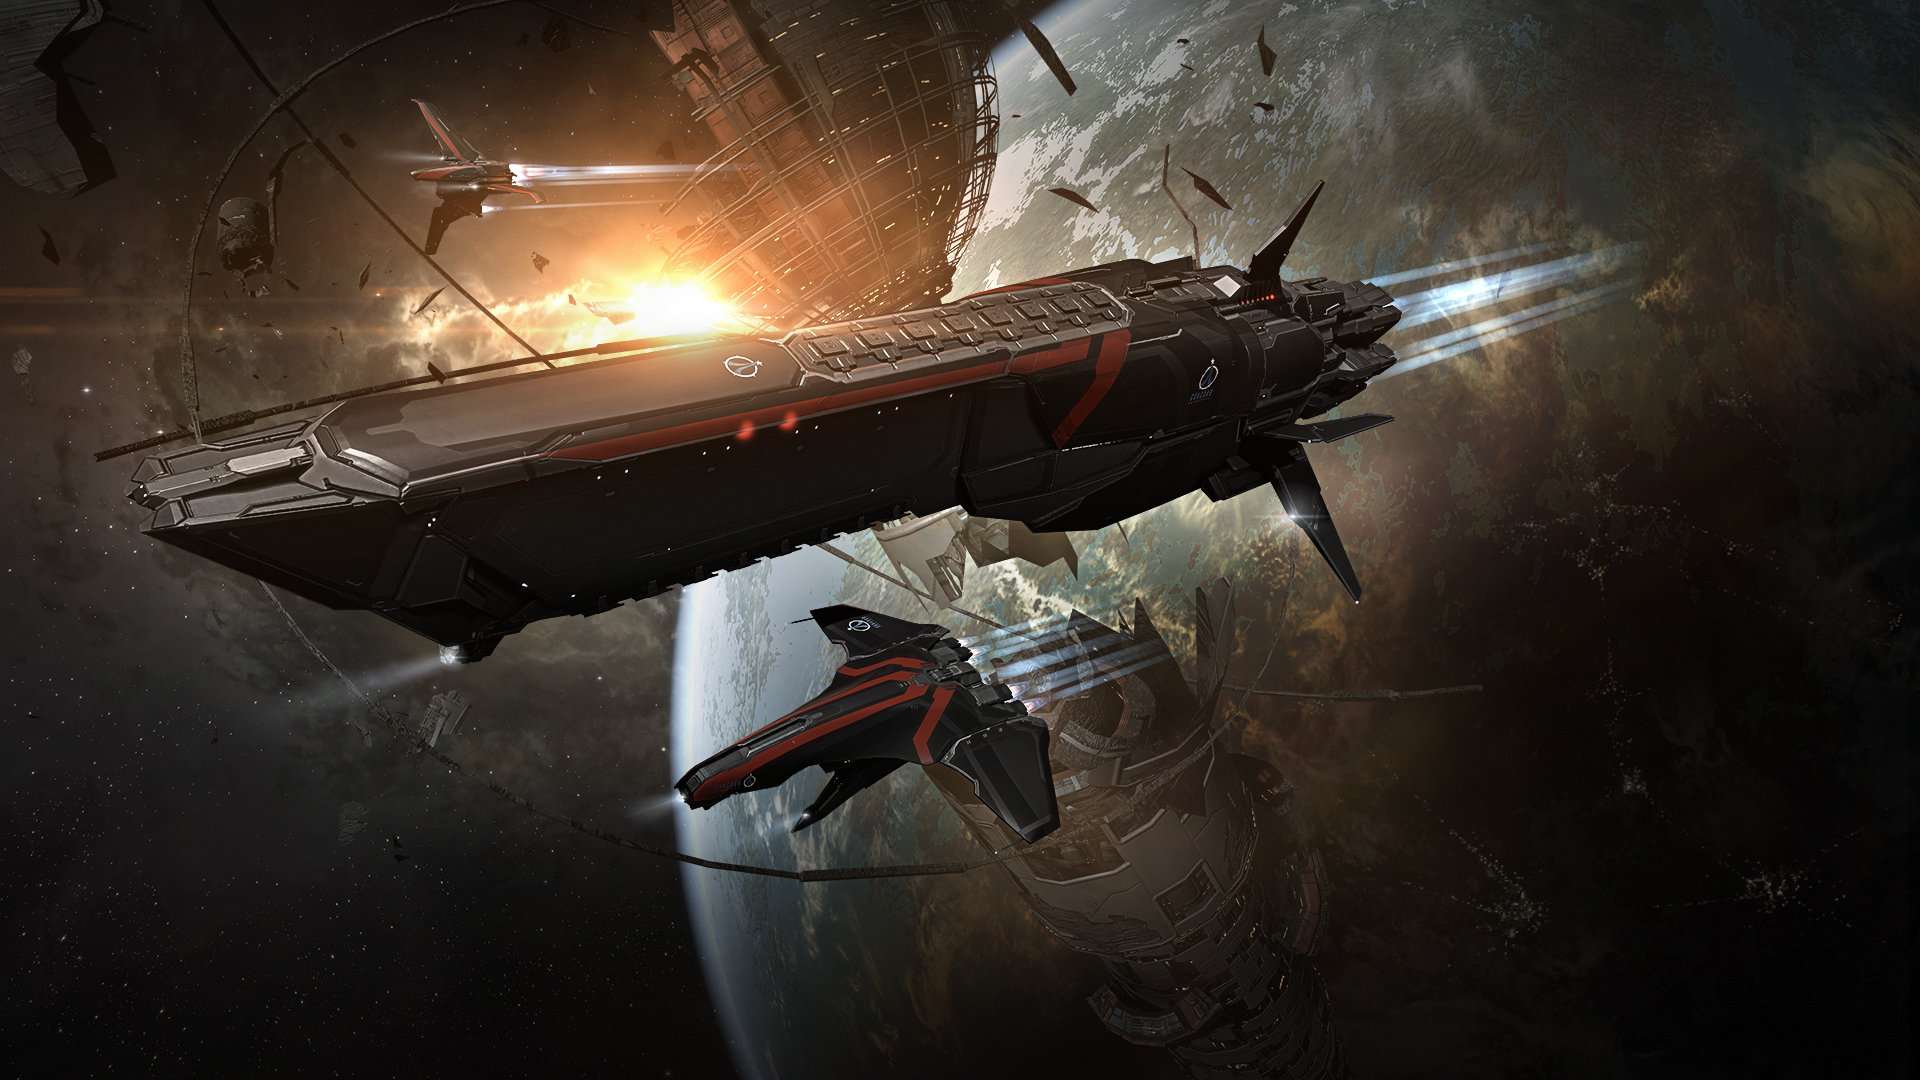 General 1920x1080 EVE Online spaceship science fiction PC gaming